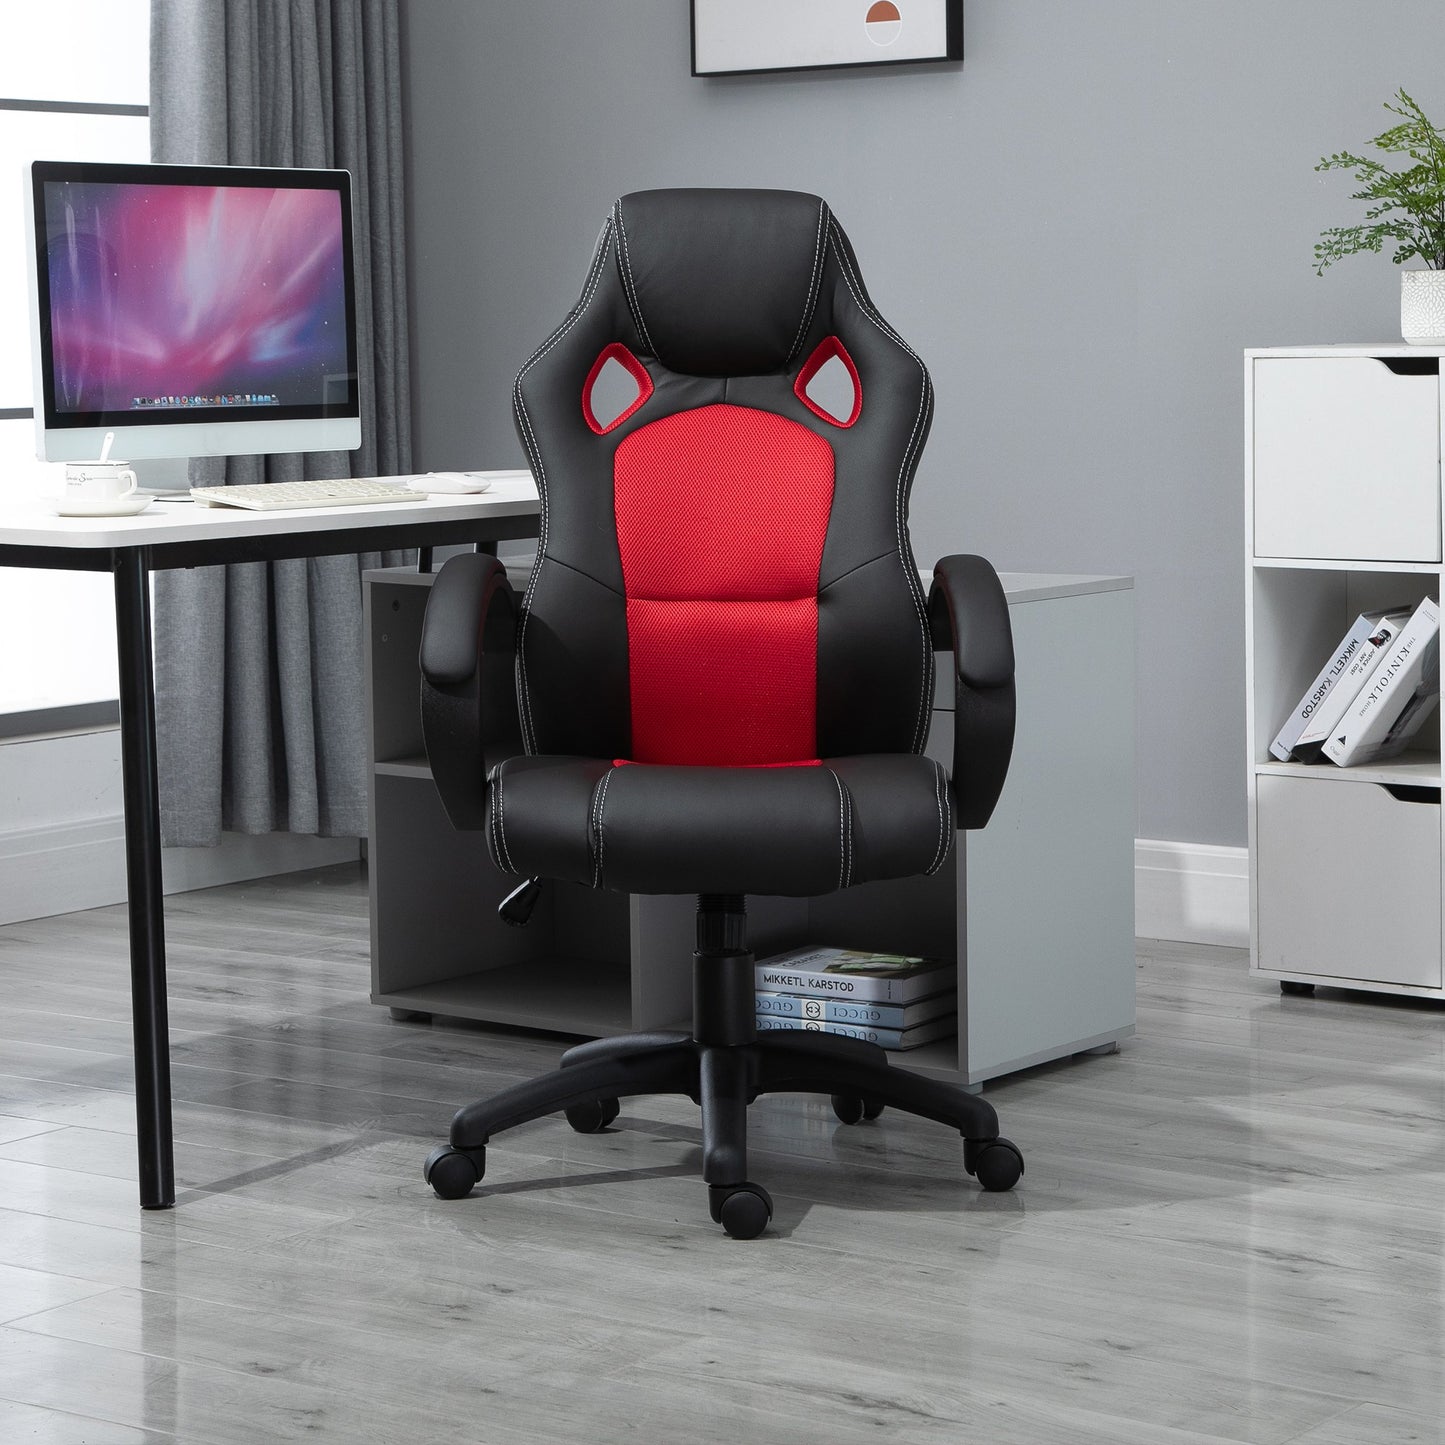 HOMCOM Racing Chair Gaming Sports Swivel PU Leather Office PC Chair Height Adjustable-Black/Red